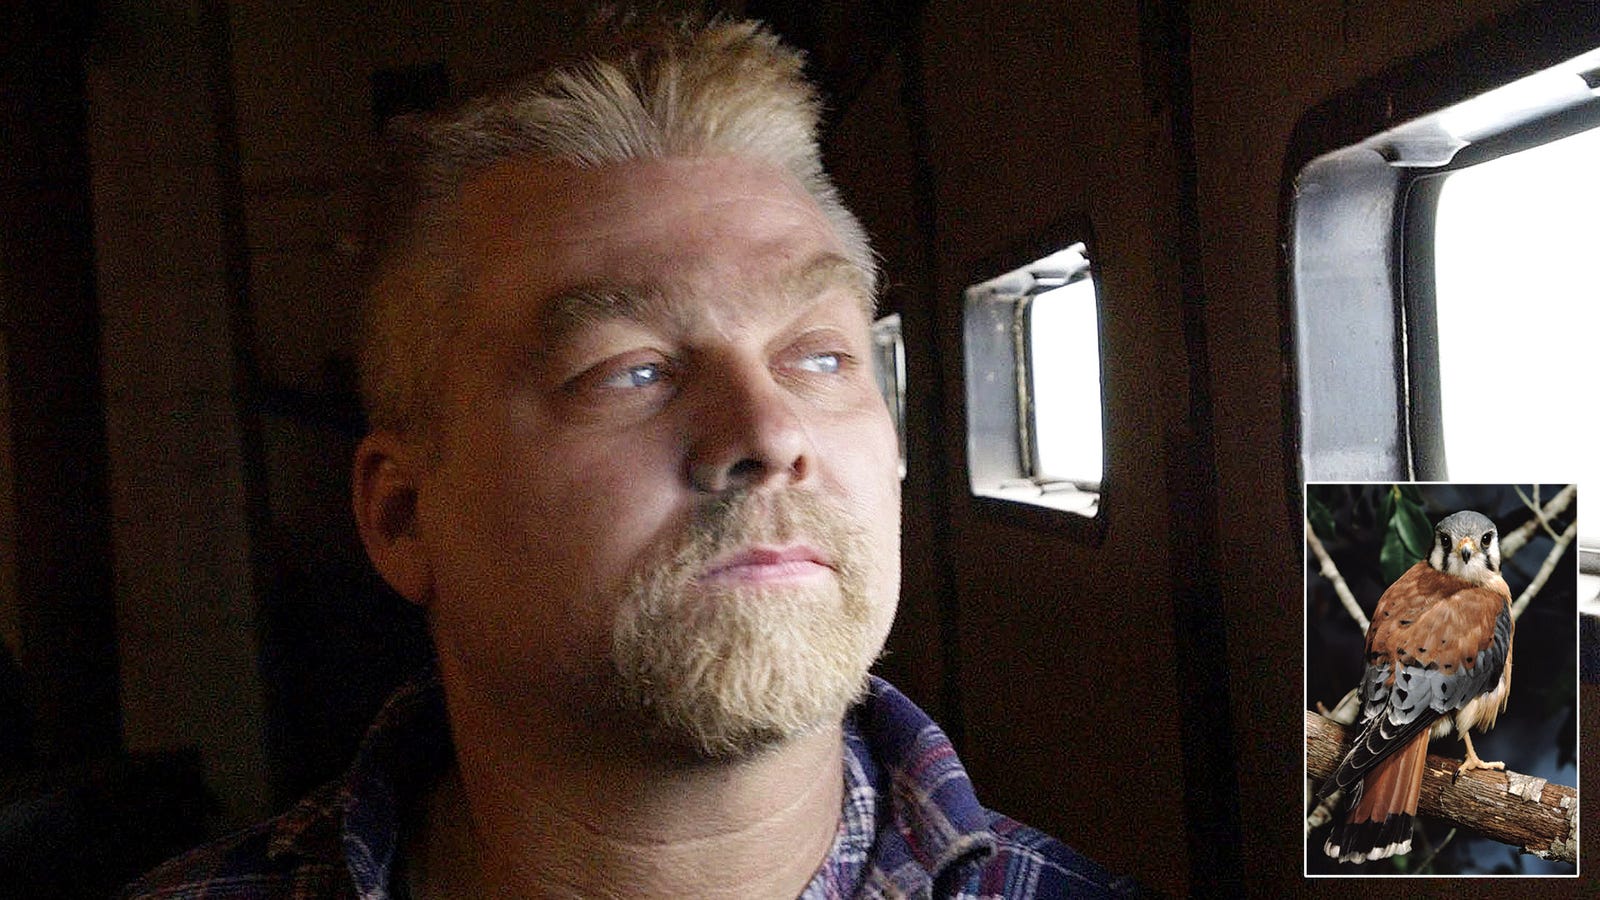 Exonerated New Evidence Reveals That Steven Avery Likely Couldnt Have Killed Teresa Halbach 